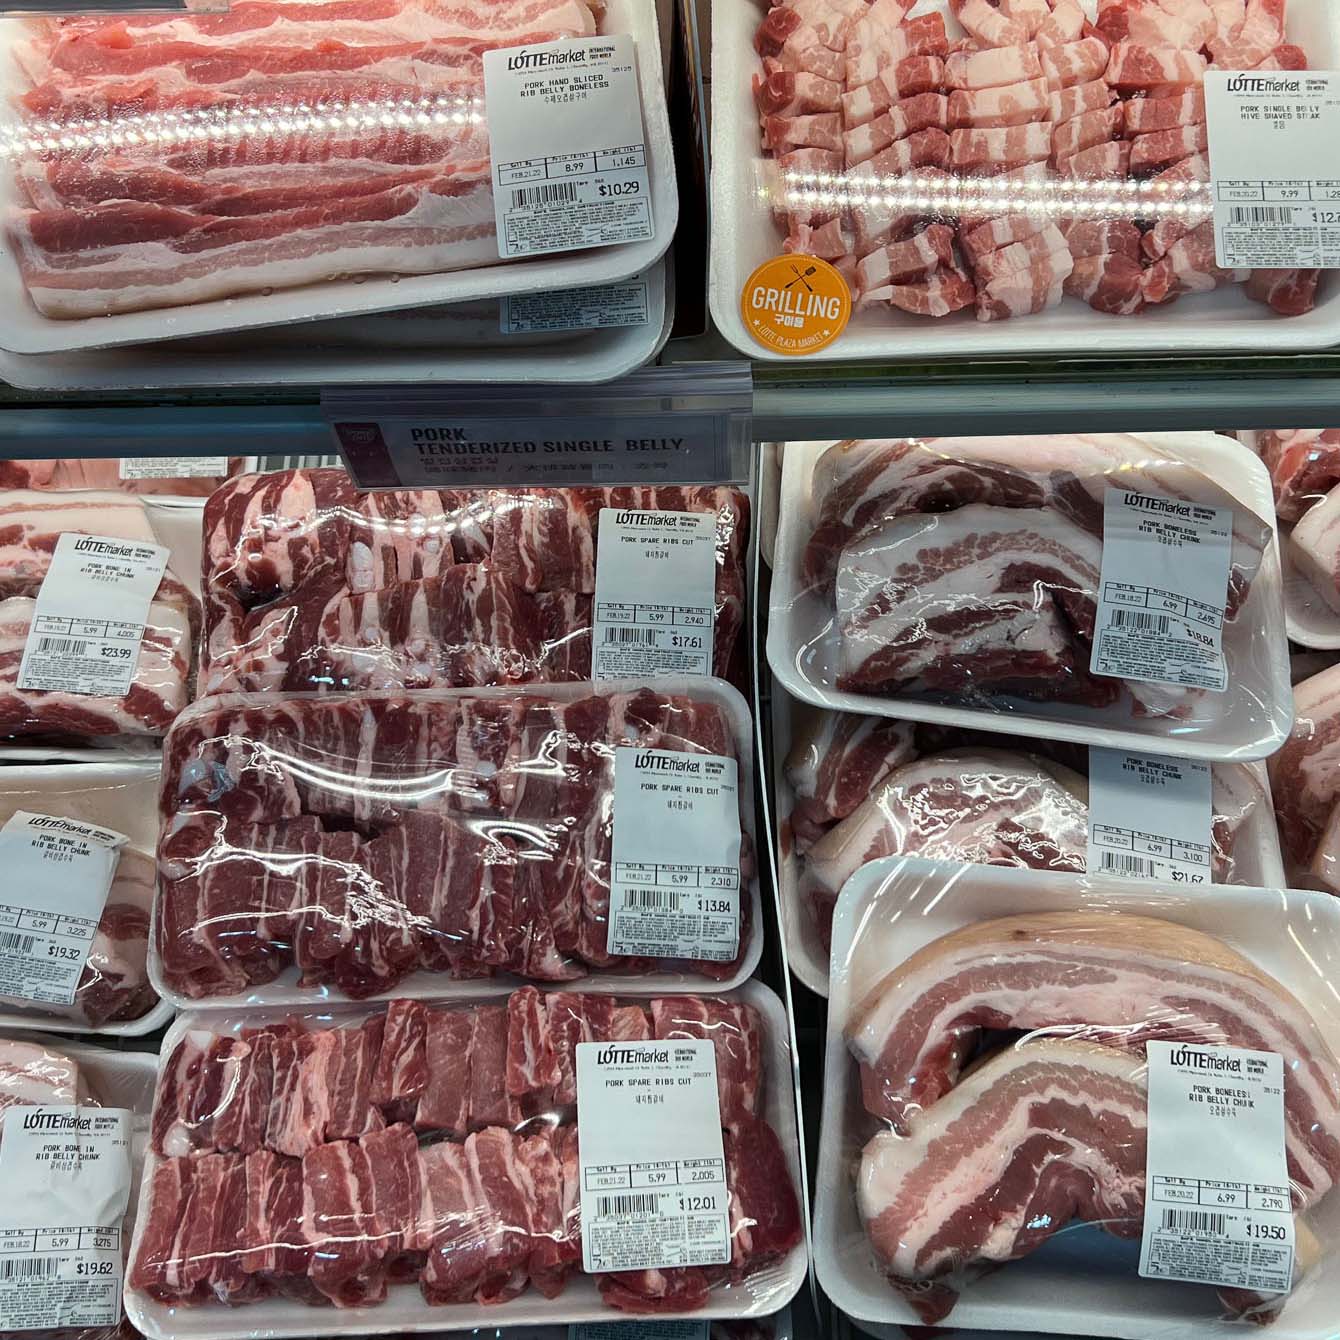 Korean style pork belly and pork short ribs are displayed on the shelf